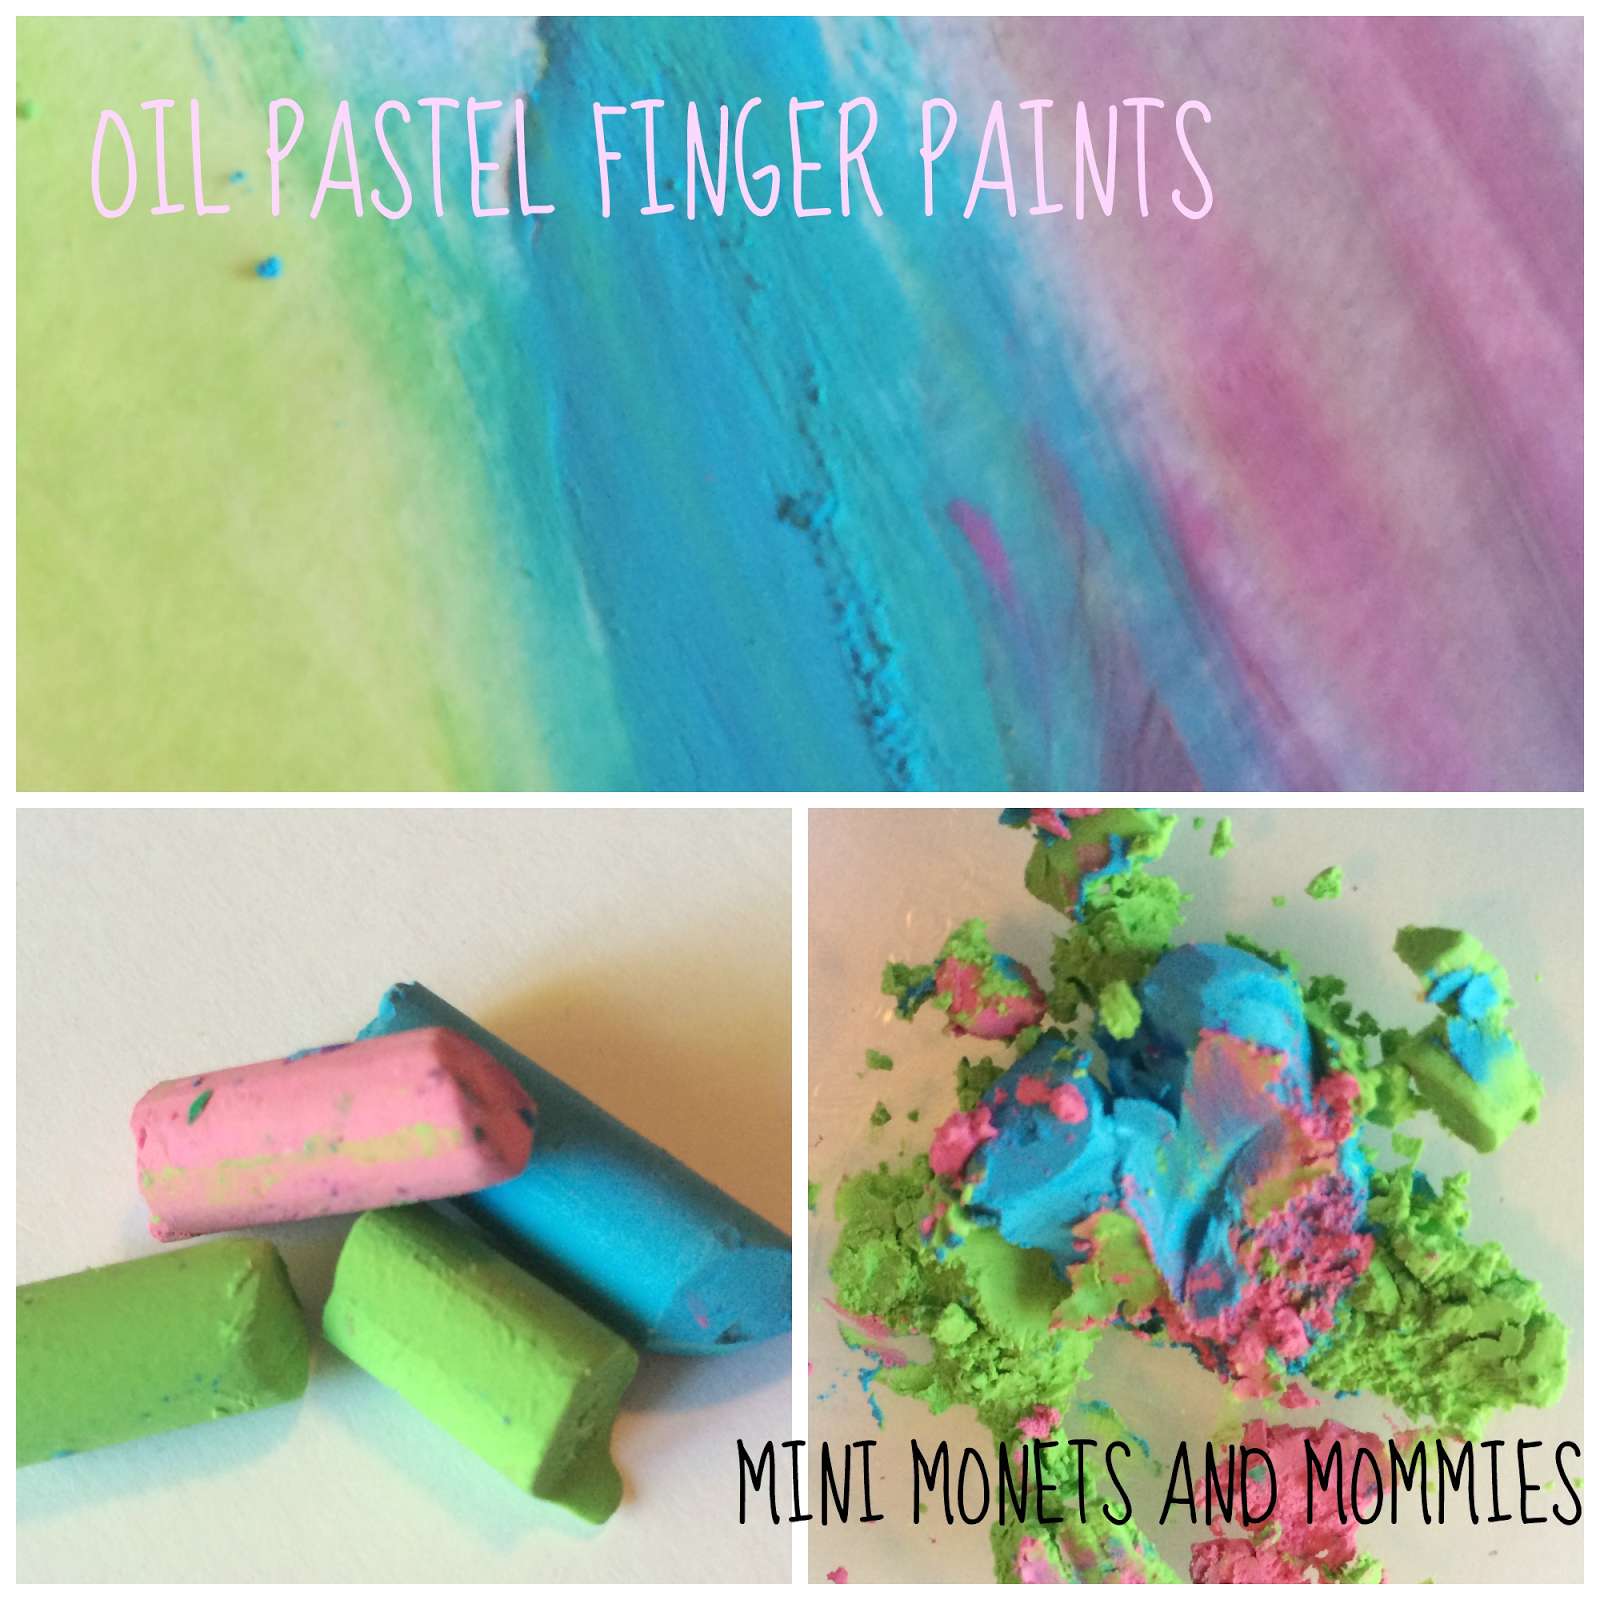 Intro To Pastels For Kids: How To Blend With Oil Pastels - Art For